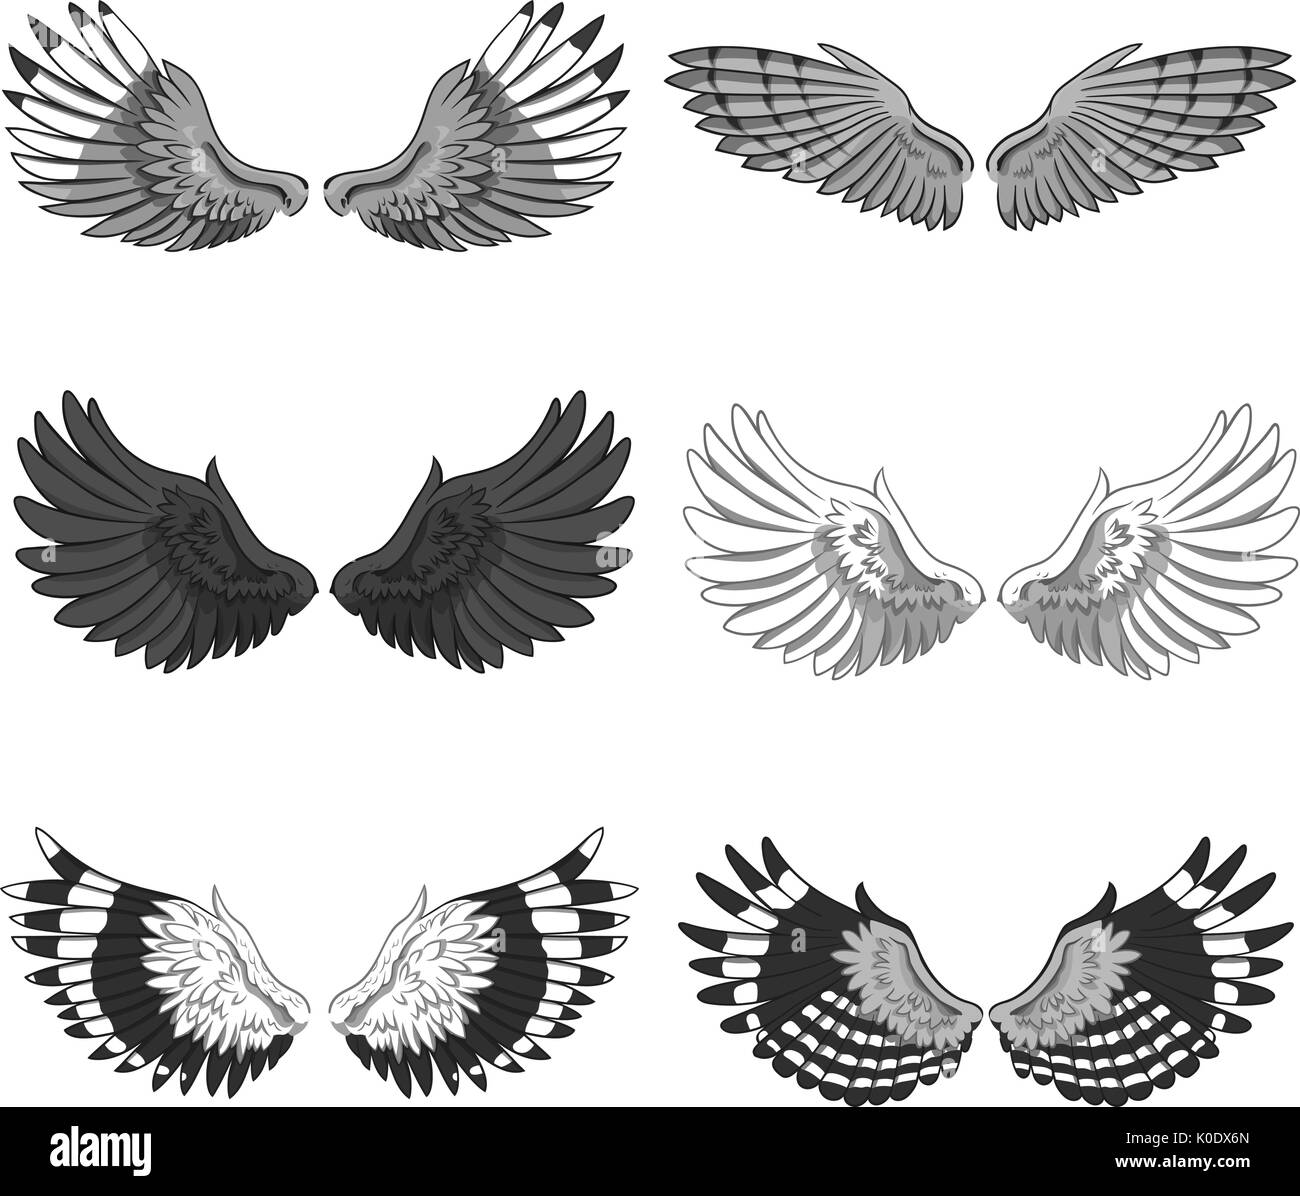 Collection of 6 pairs of elegant bird or angel spread wings isolated on white background. Symbol of flight and freedom. Monochrome vector illustration for logo, banner, advertisement, tattoo. Stock Vector